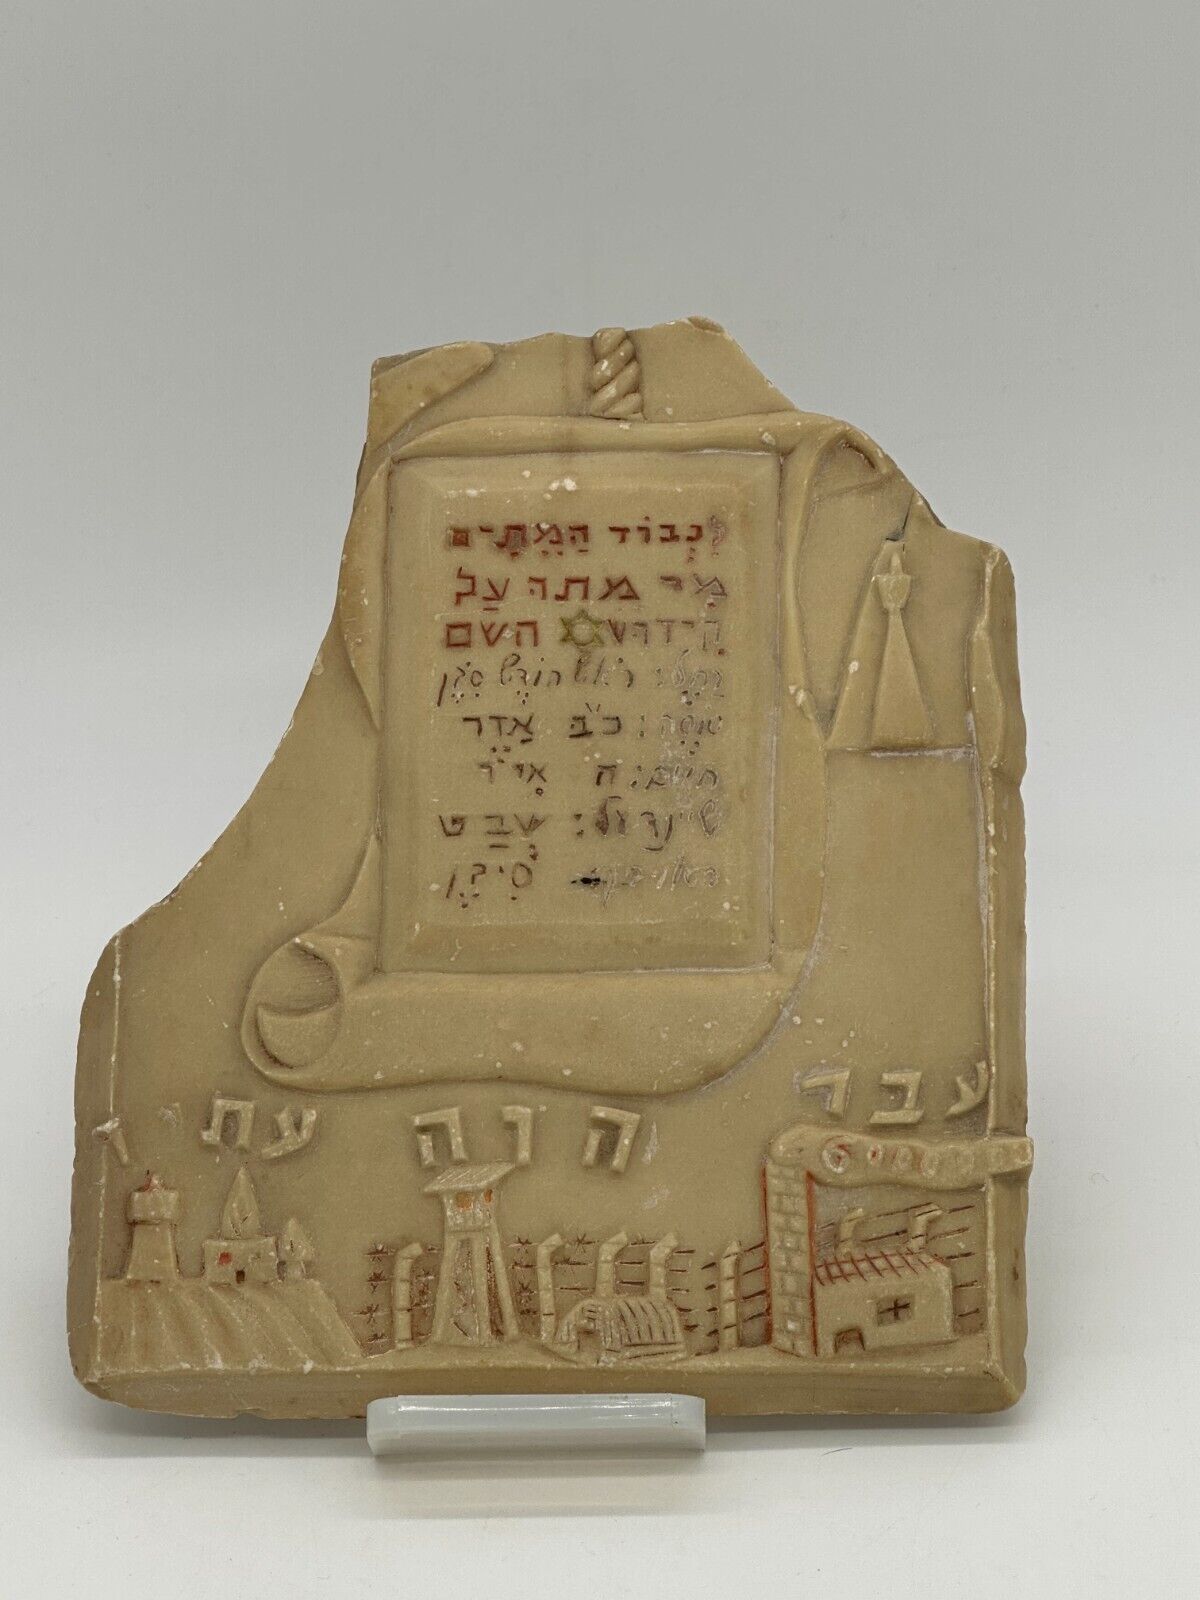 Rare Carved memorial plaque made by  Jewish internee in Cyprus, 1948, Holocaust